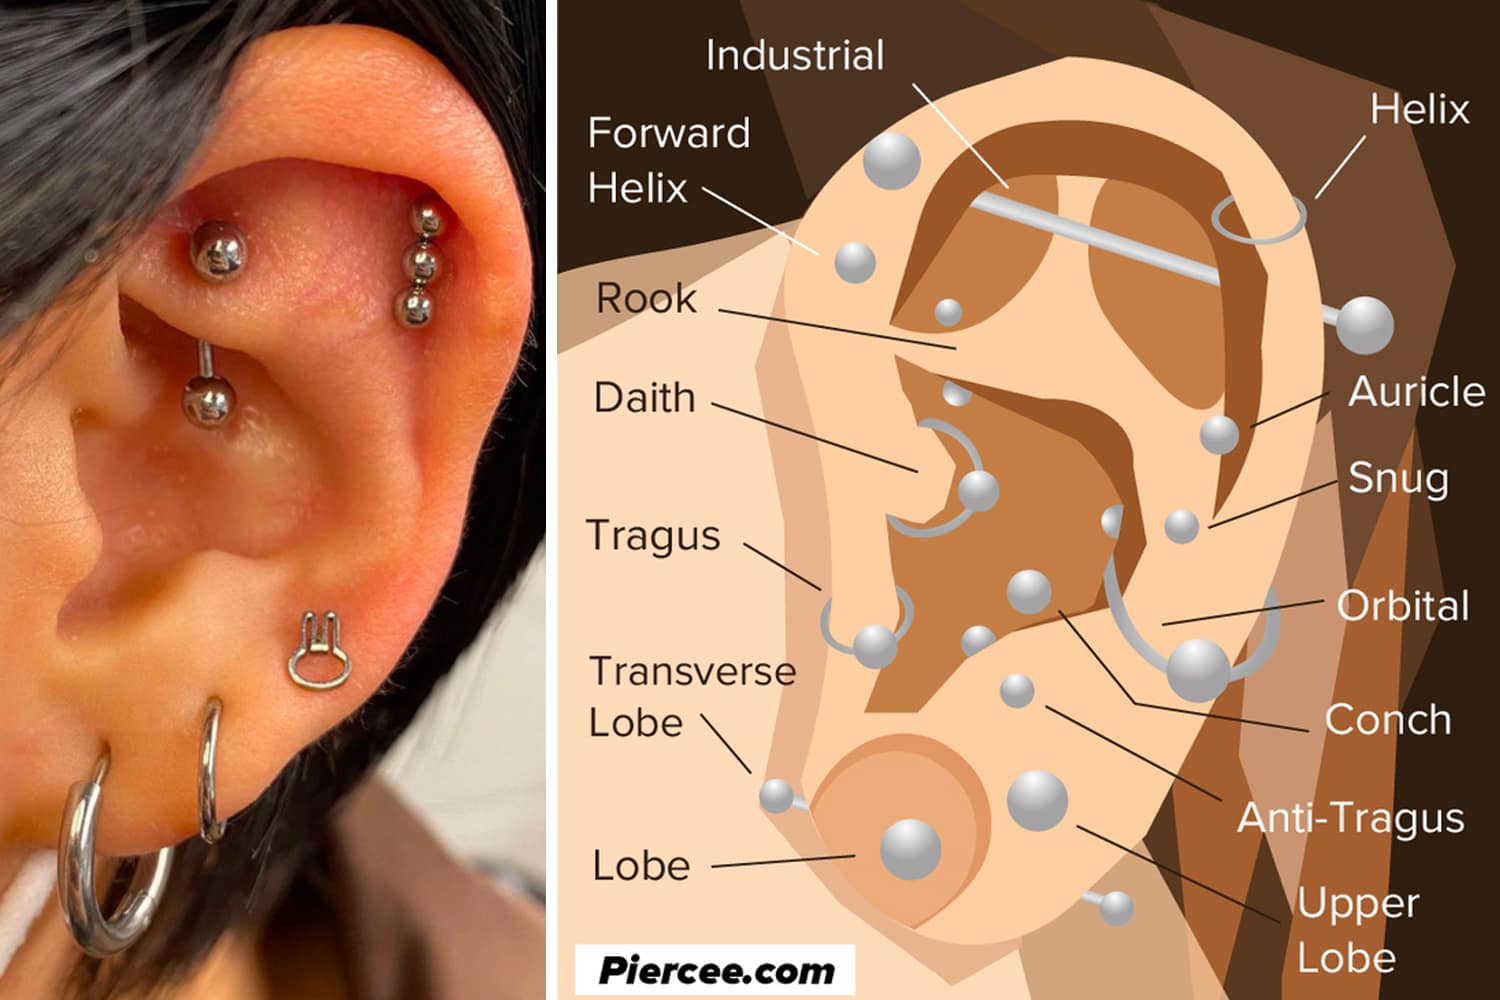 Piercing Ear / 26 Ear Piercings Too Much Any I Should Take Out Any